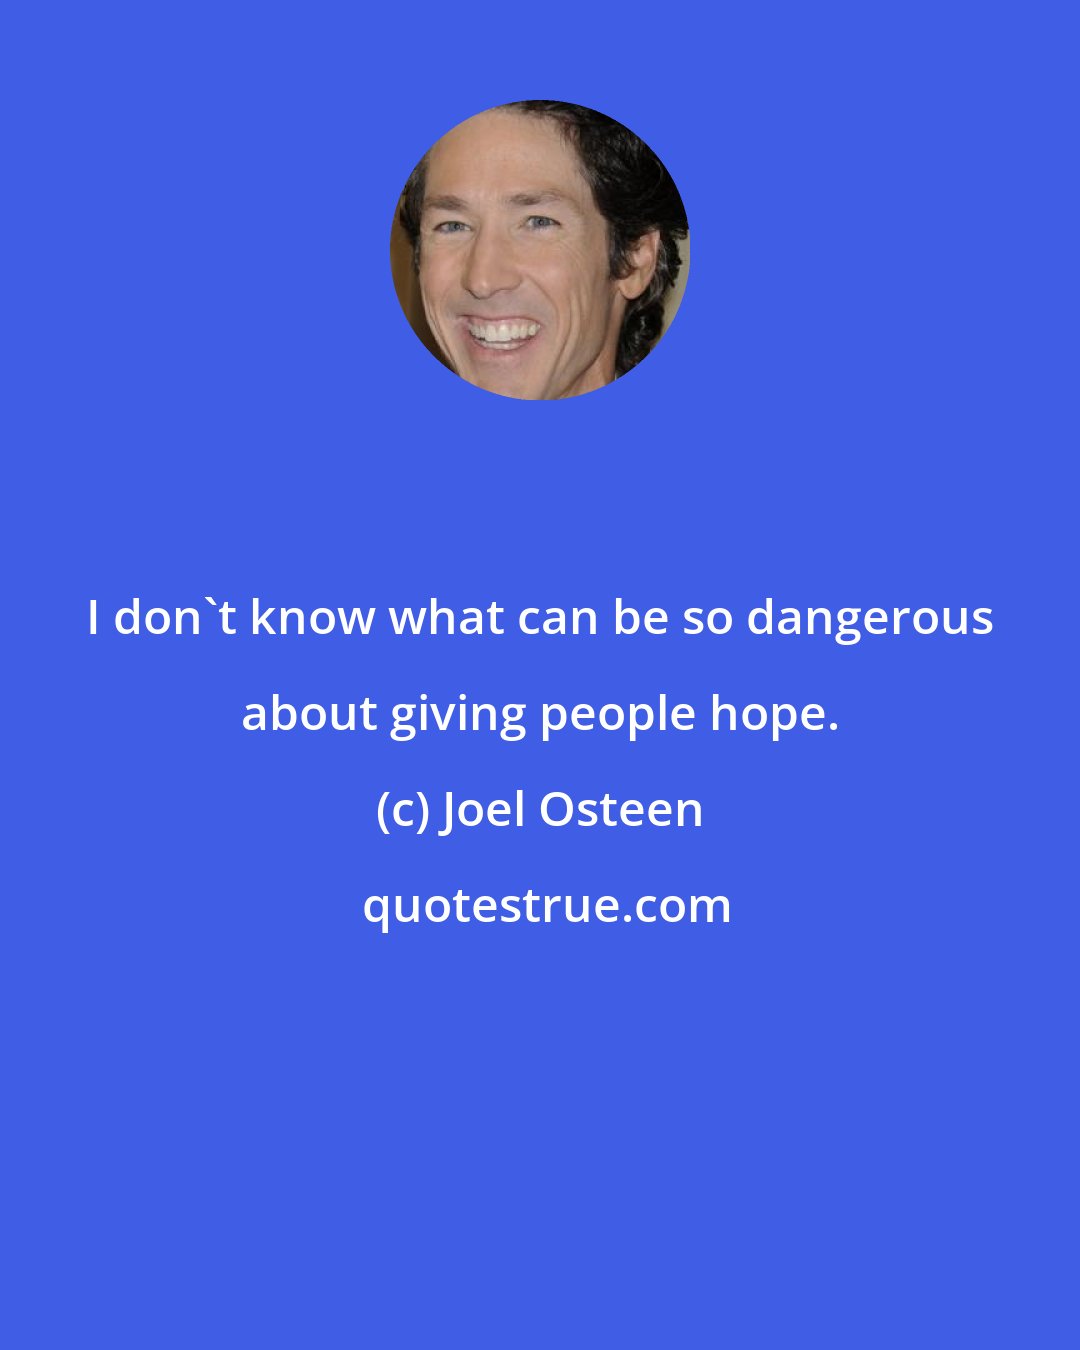 Joel Osteen: I don't know what can be so dangerous about giving people hope.